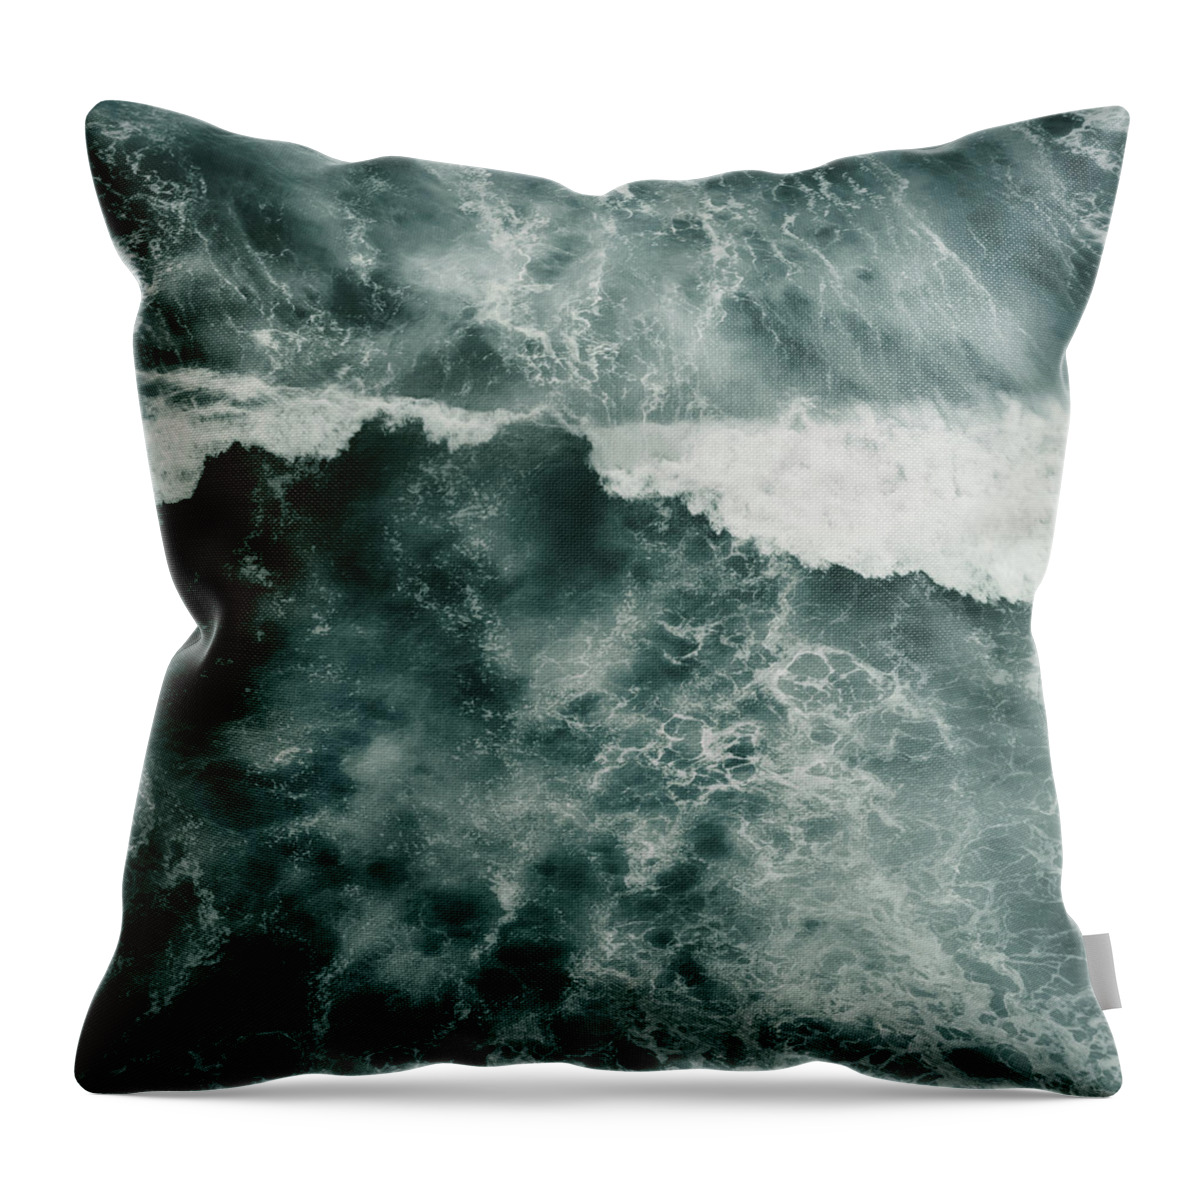 Tenerife Throw Pillow featuring the photograph Ocean Wave by Dorit Fuhg